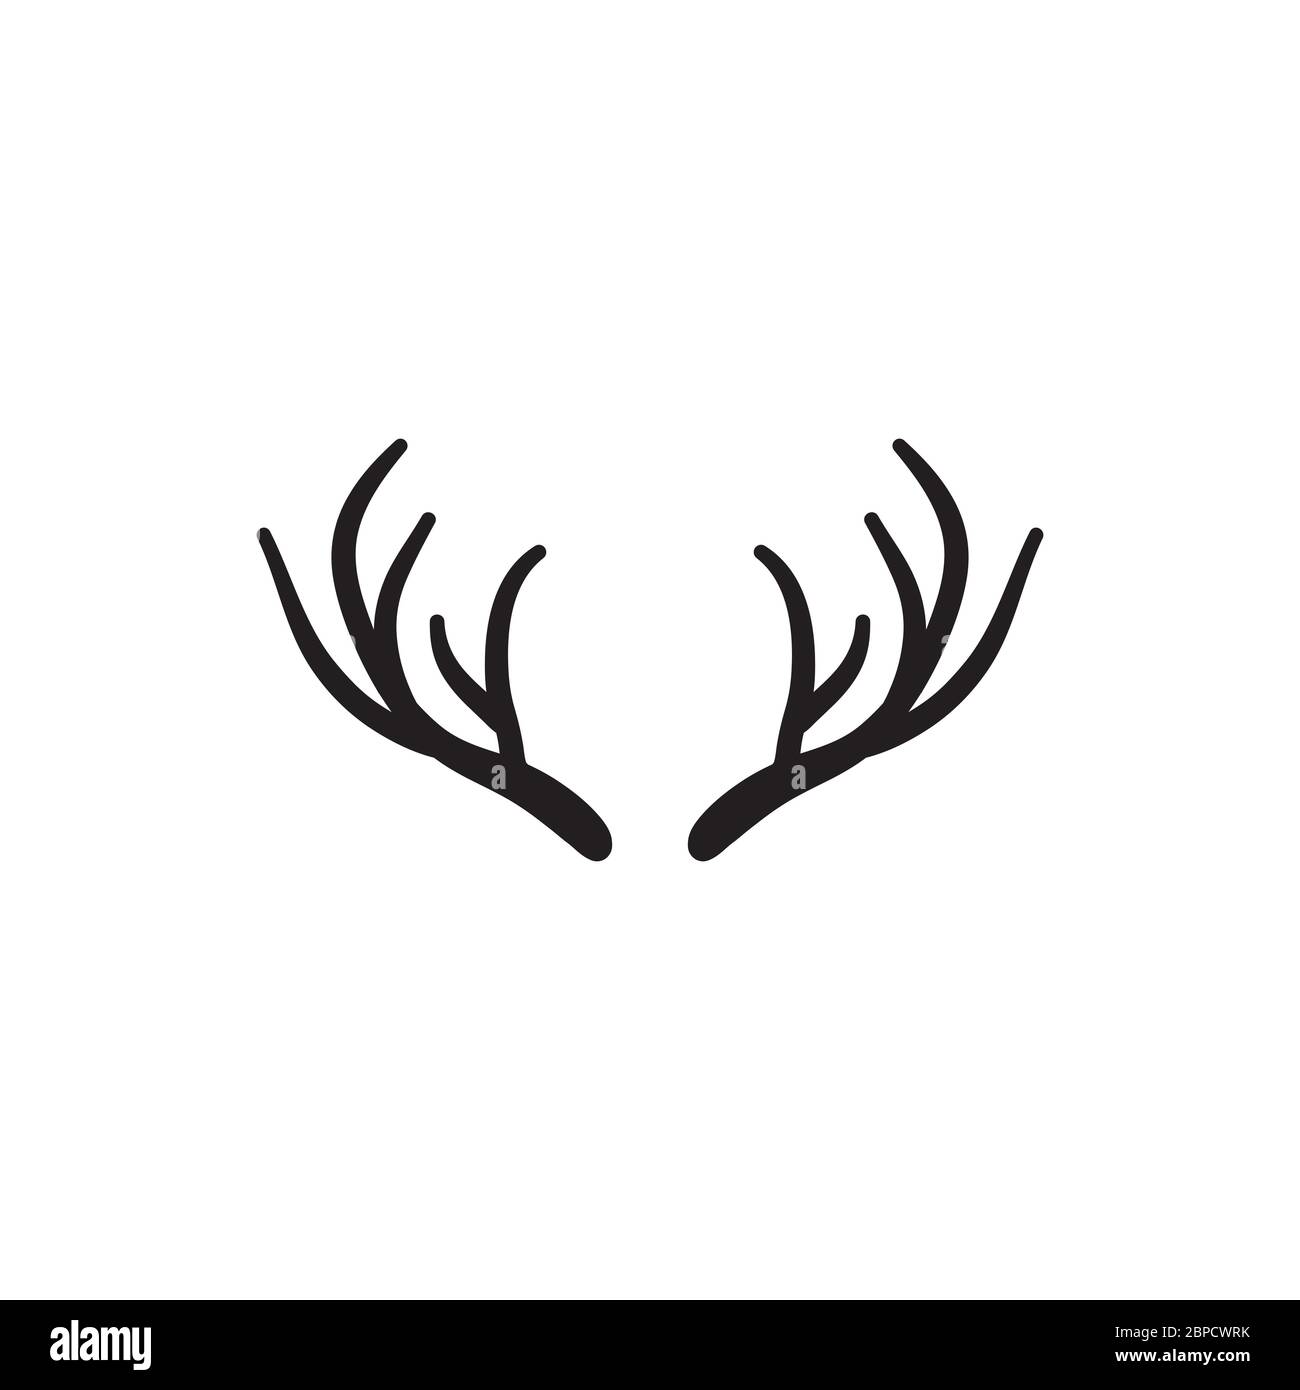 Deer antler Black and White Stock Photos & Images - Alamy